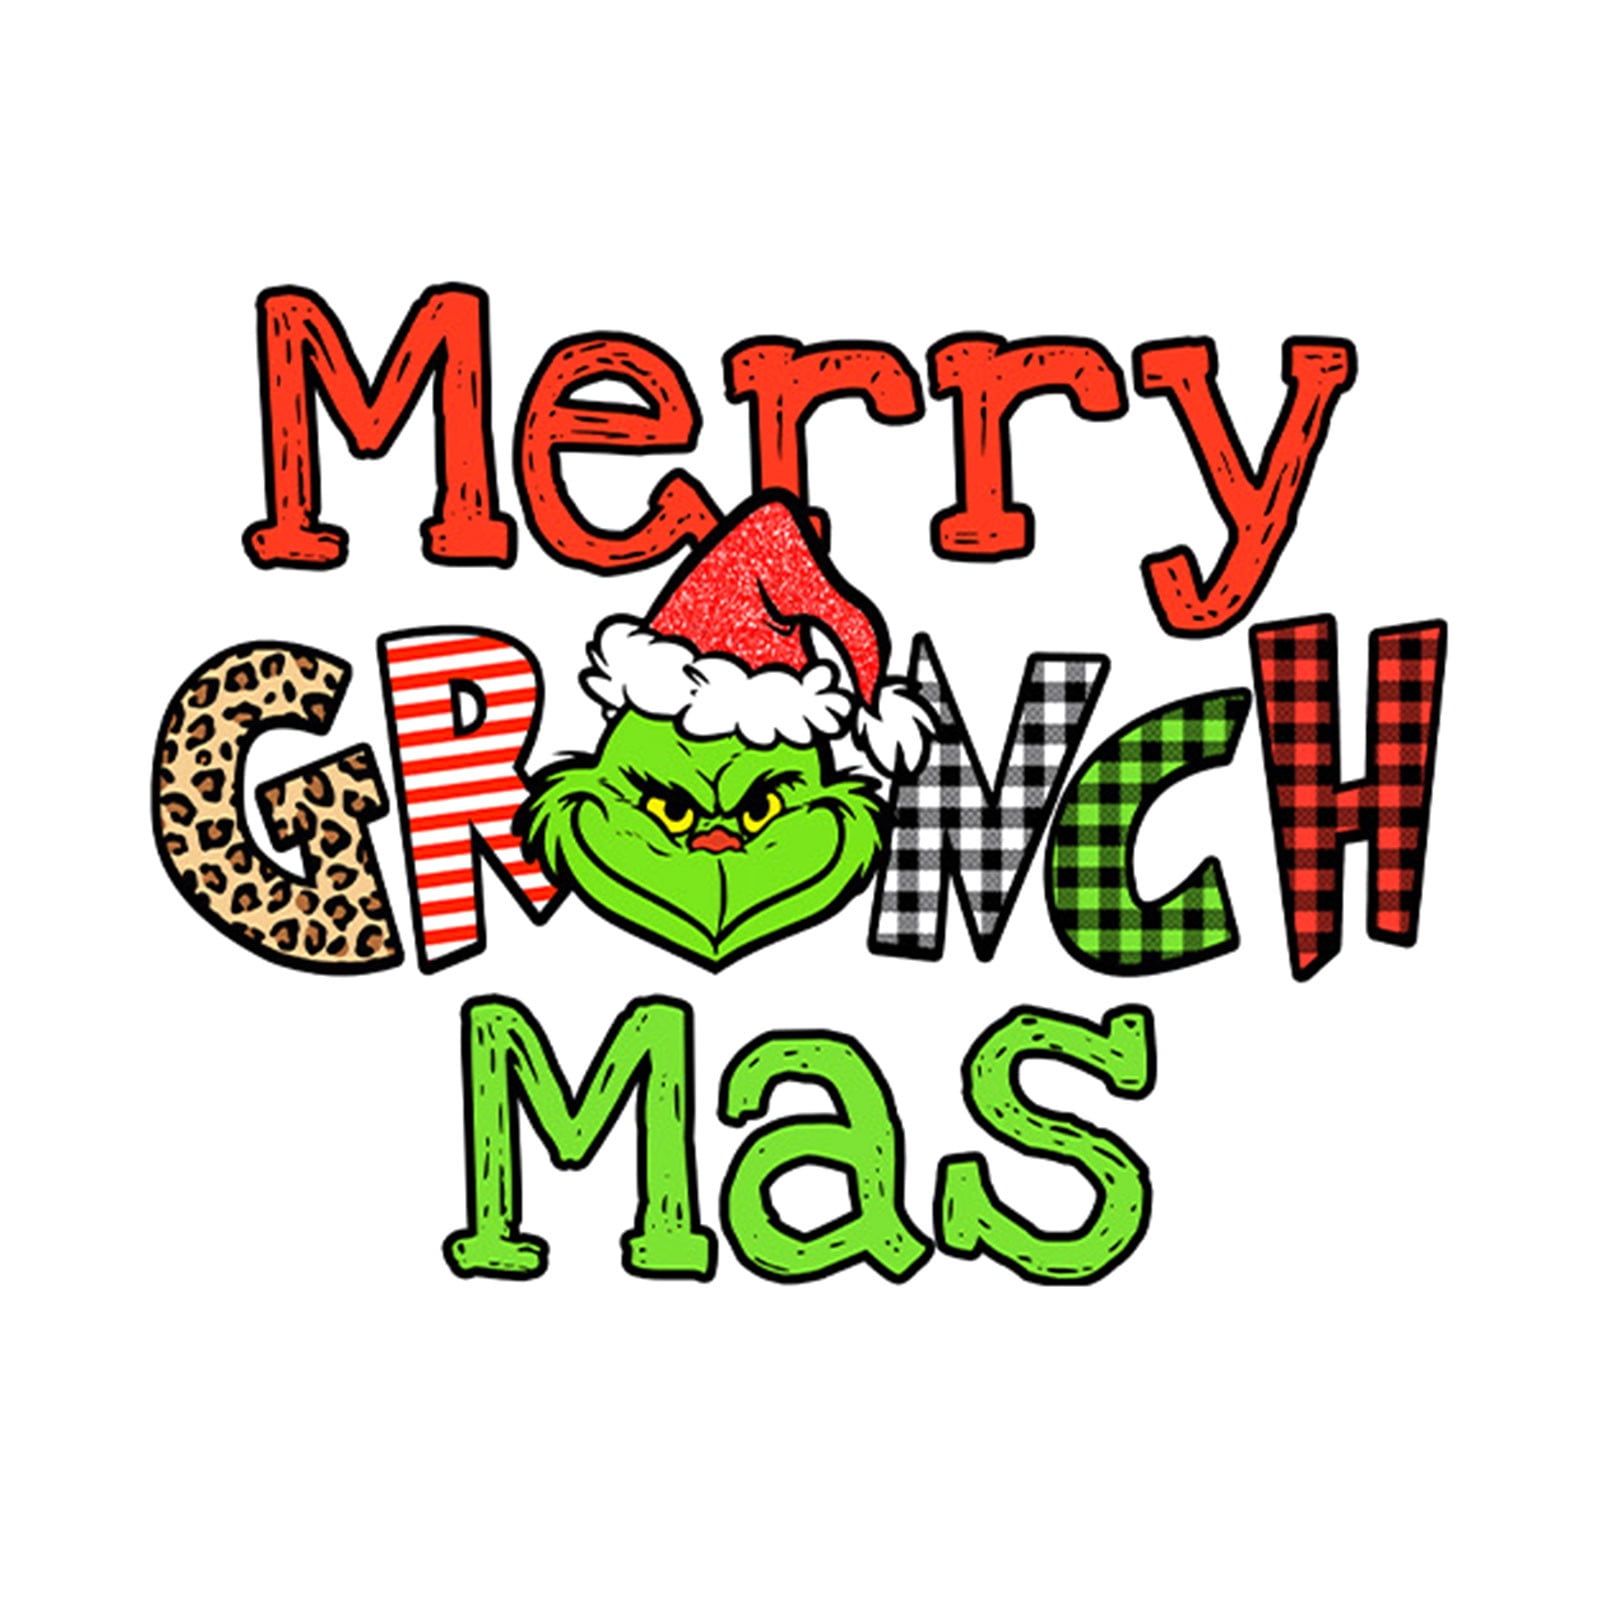 Grinch,grinch Christmas Decorations,Grinch Decor,Christmas Iron on Transfer Heat Transfer Design Sticker Iron on Vinyl Patches Iron on Transfer Paper